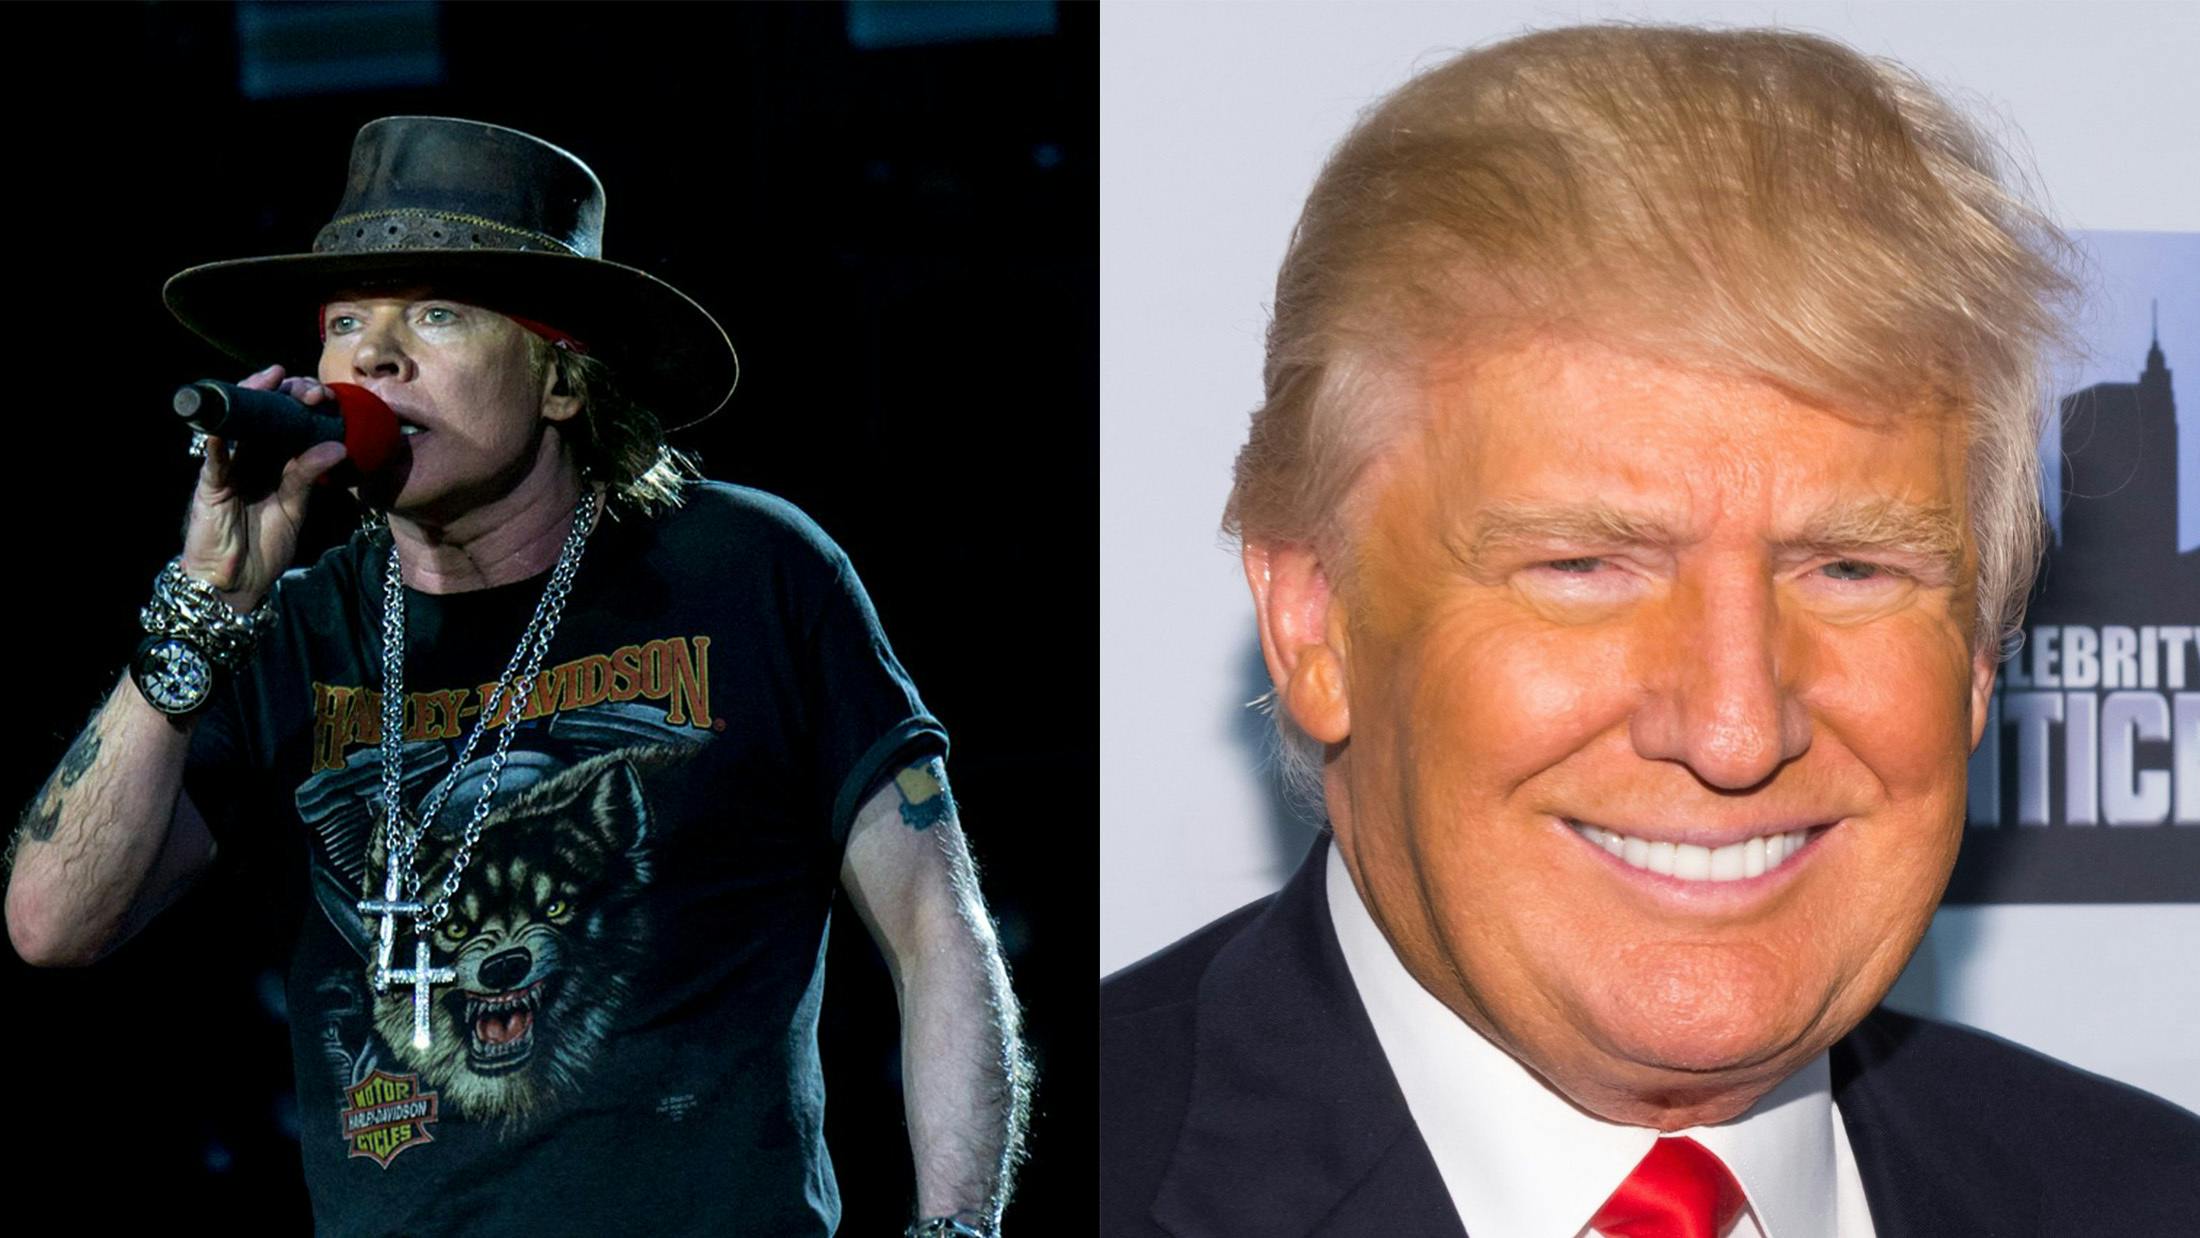 Axl Rose: Not A Fan Of The Trump Administration 